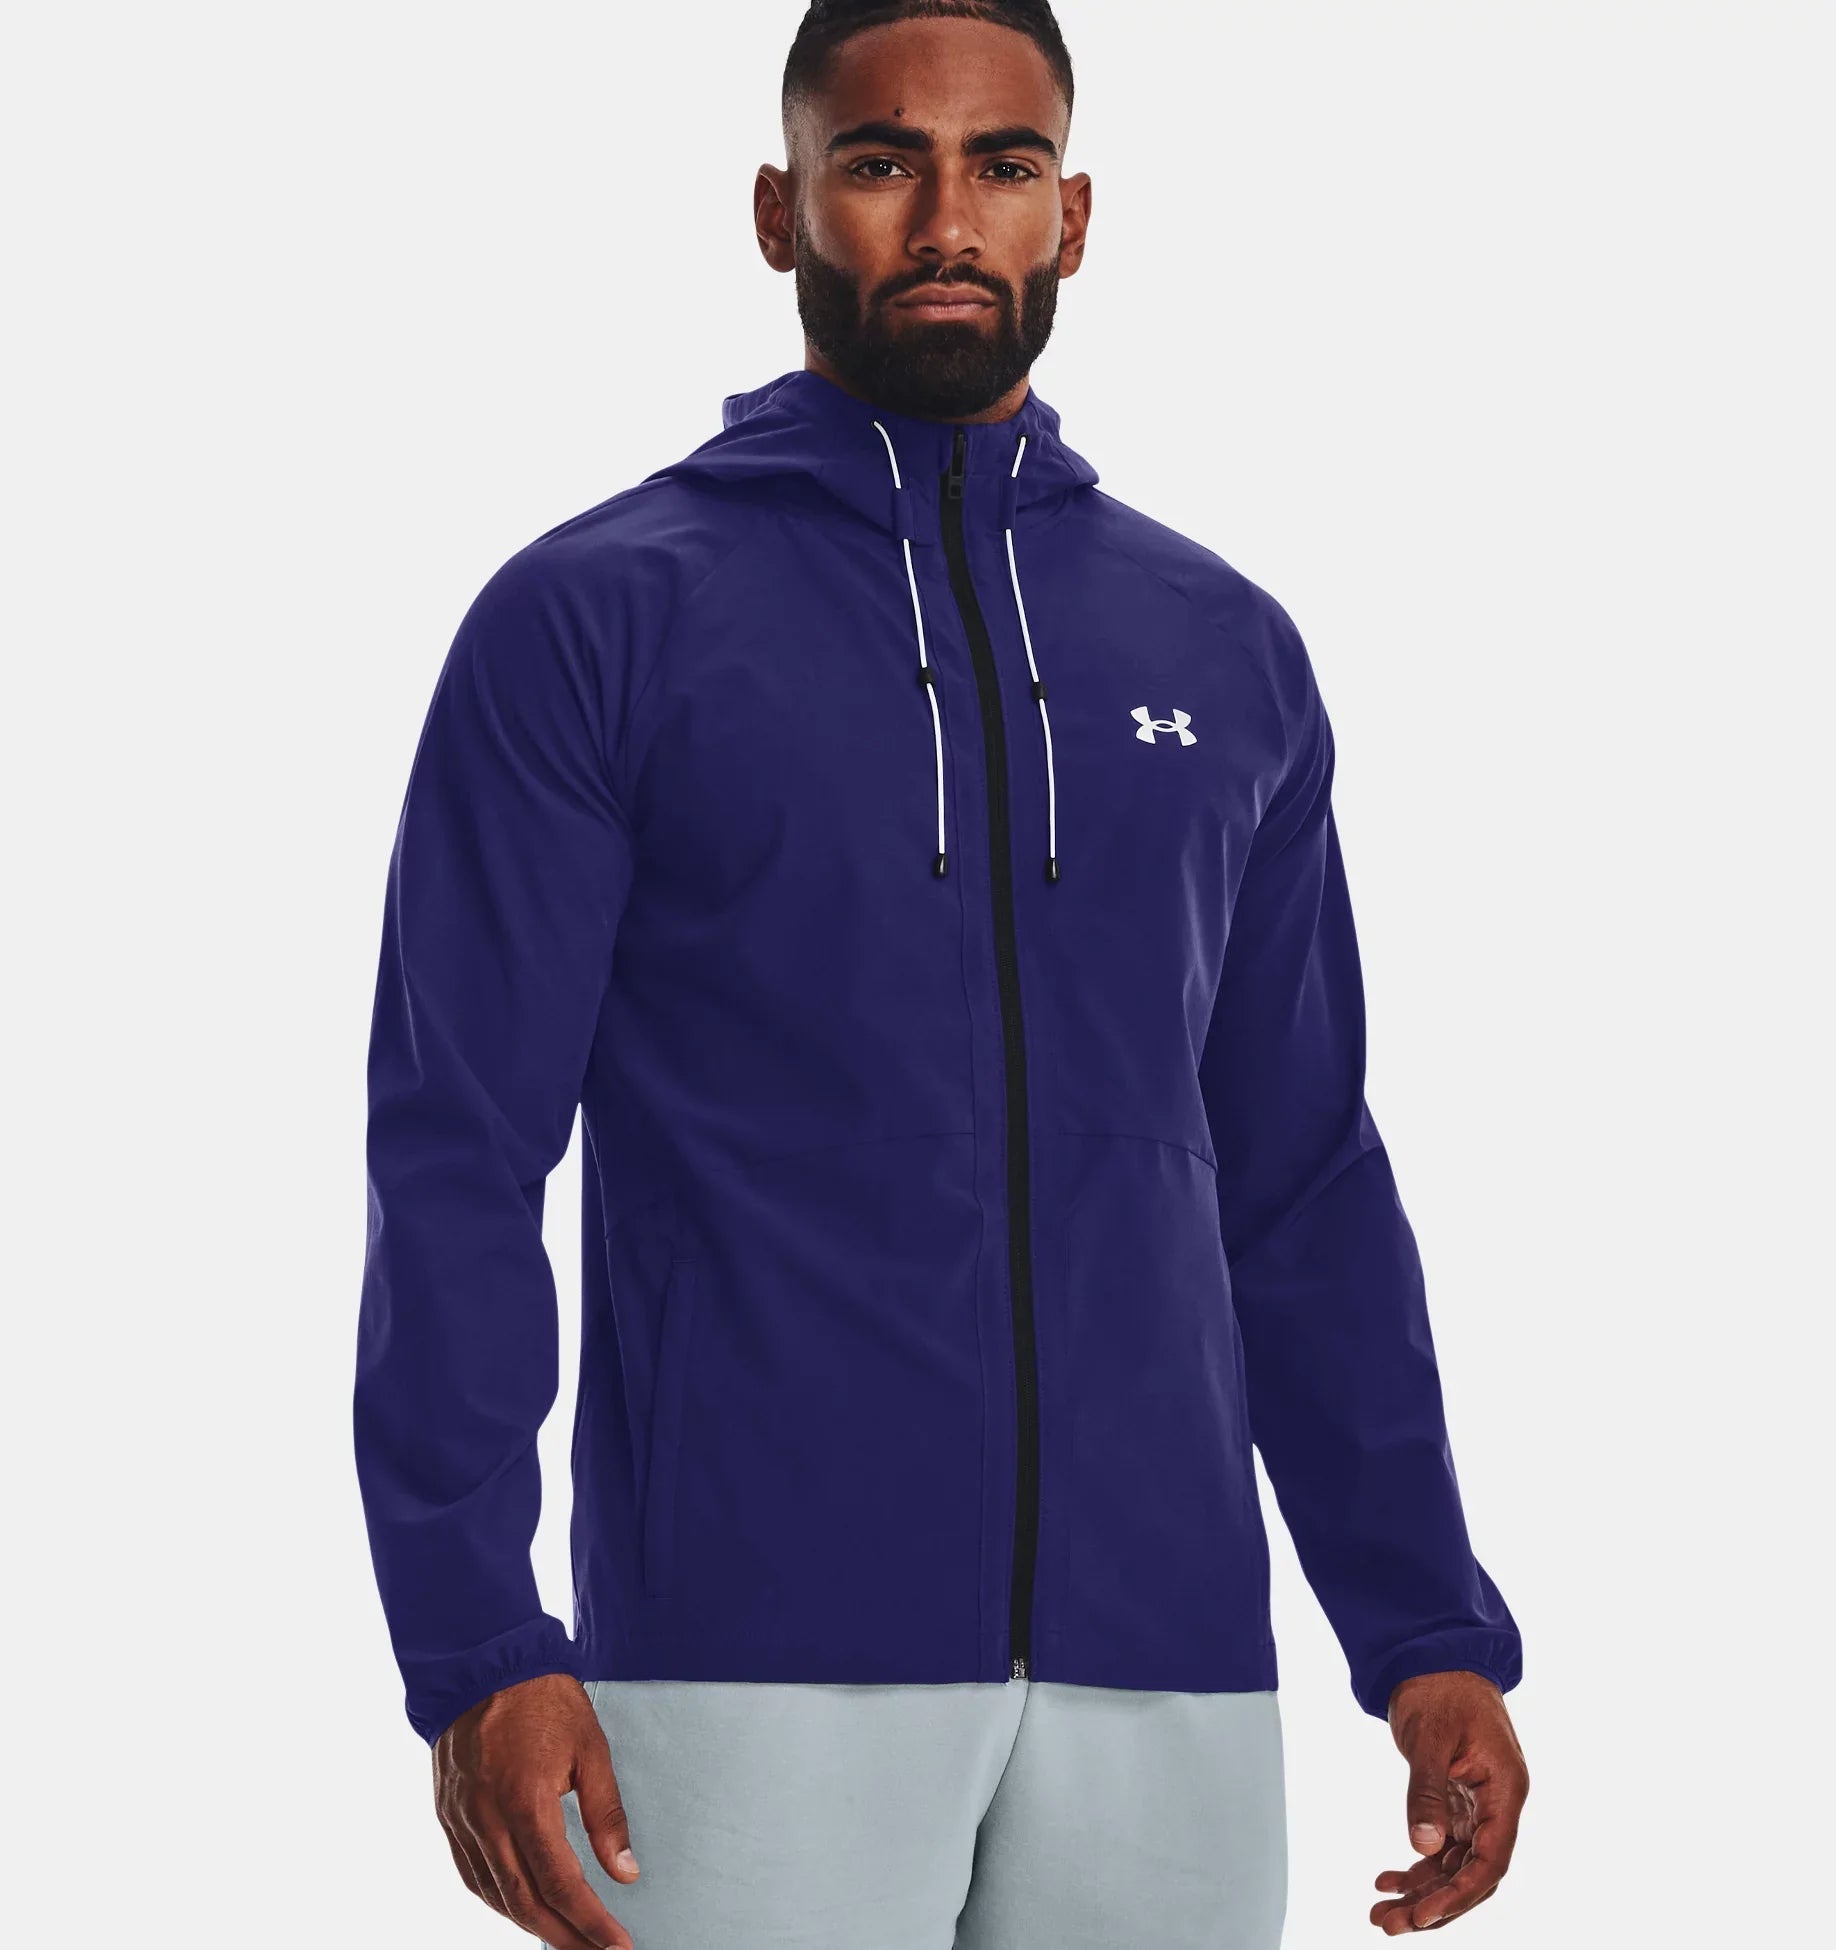 UA Stretch Woven Windbreaker - The Shoe CollectiveUnder Armour